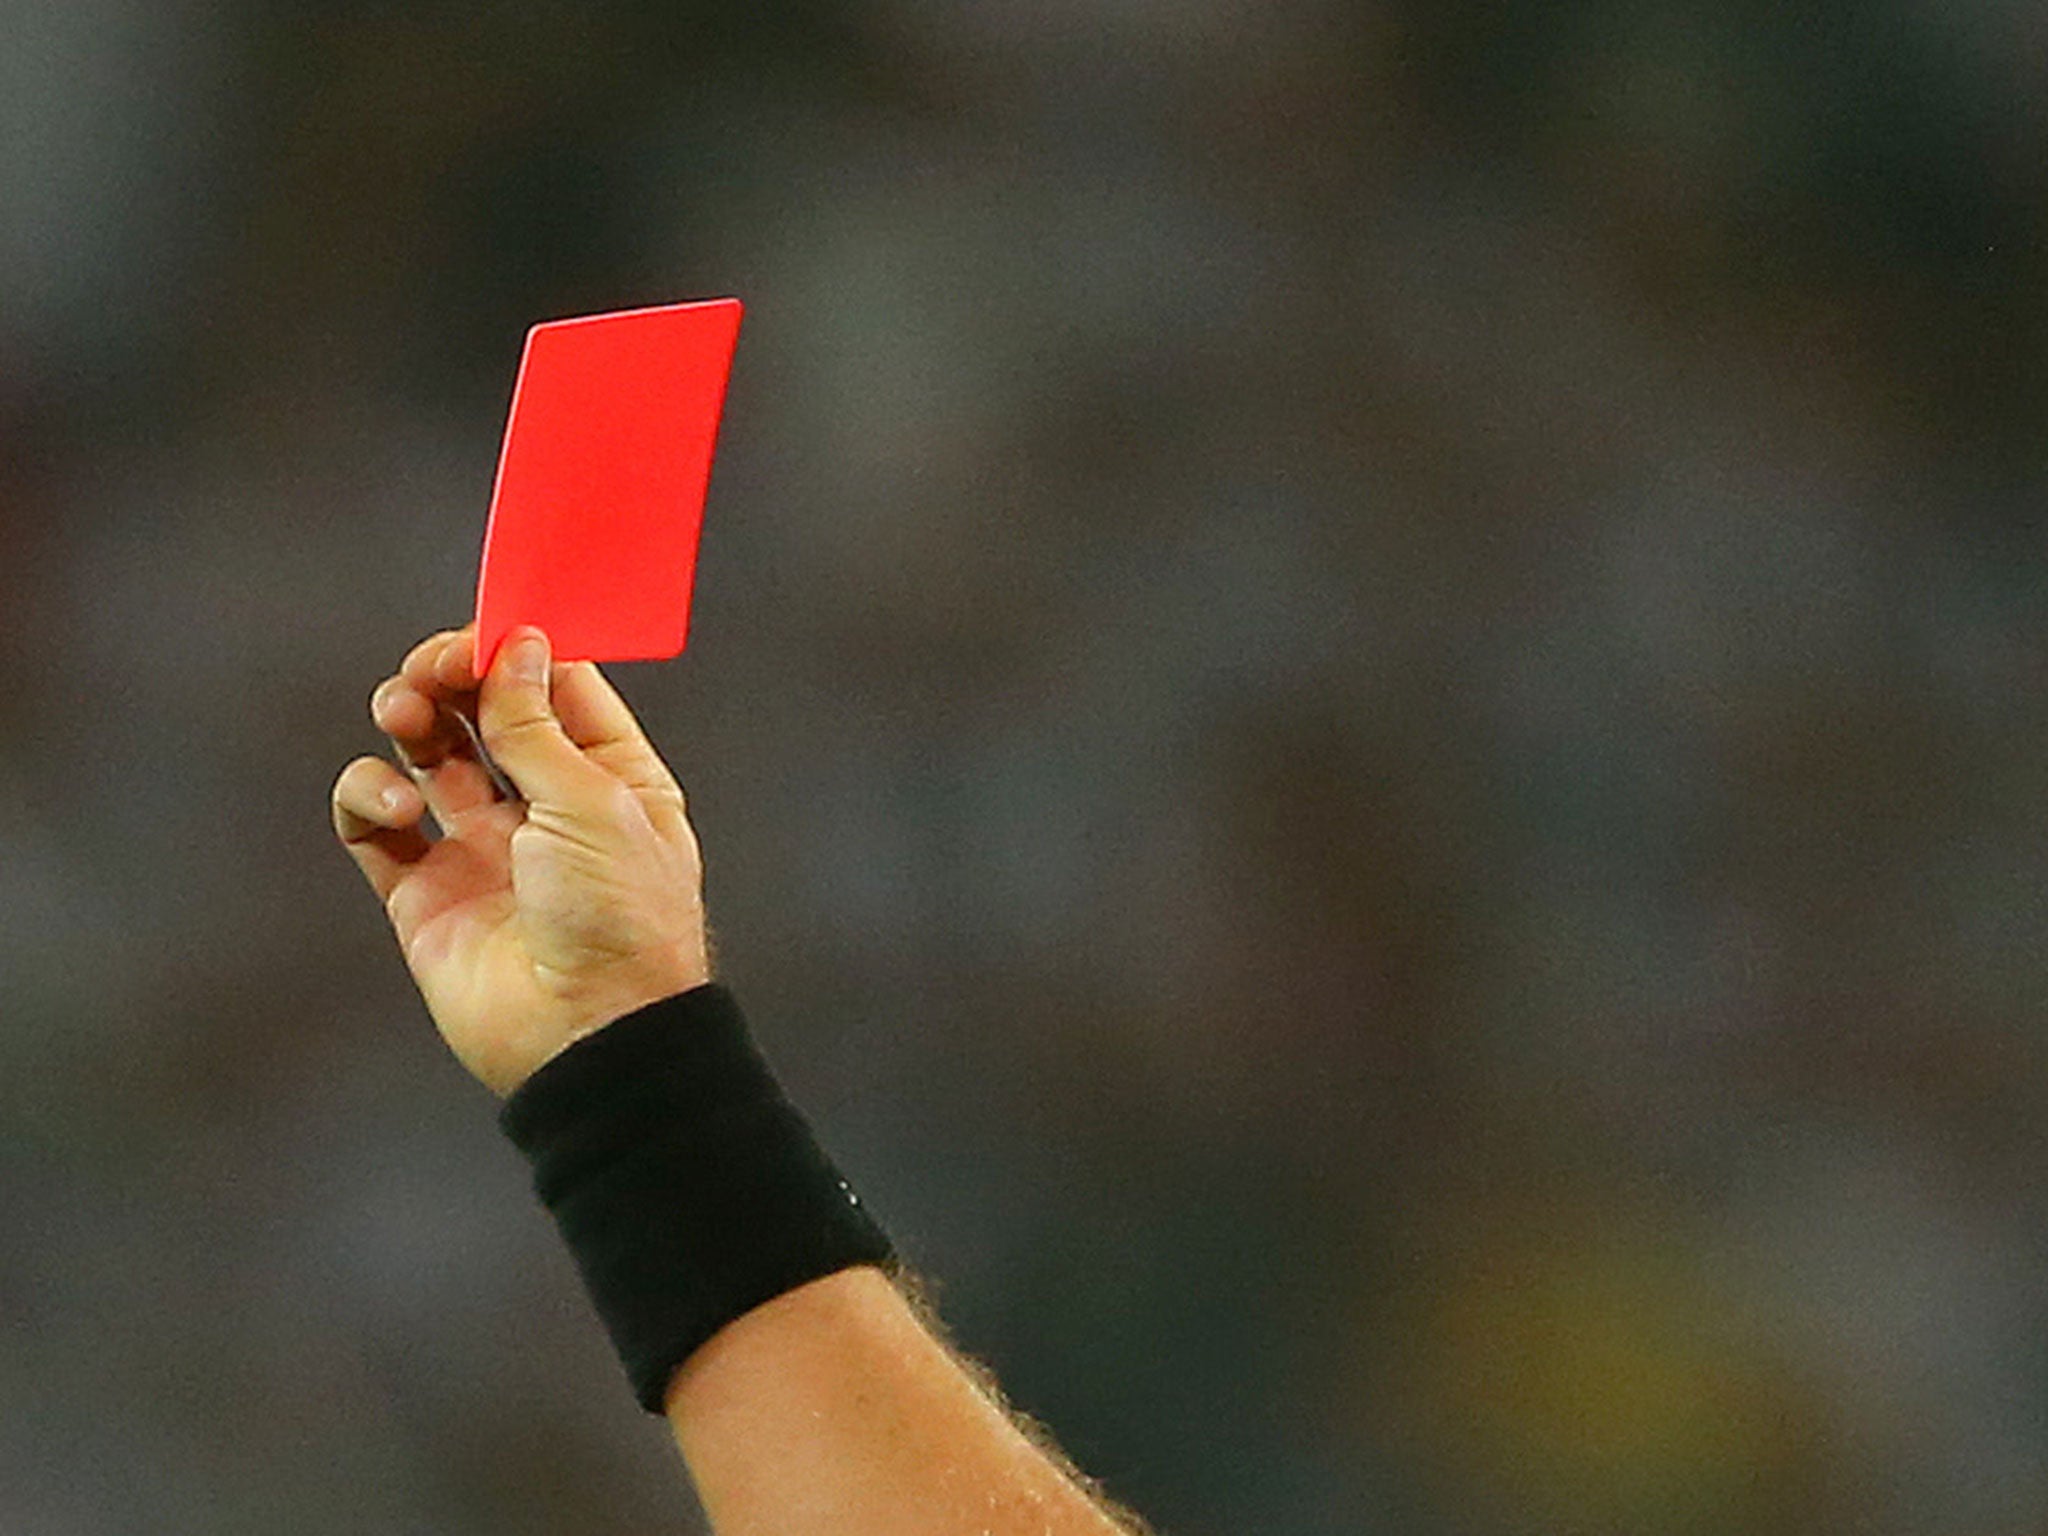 A referee issues a red card